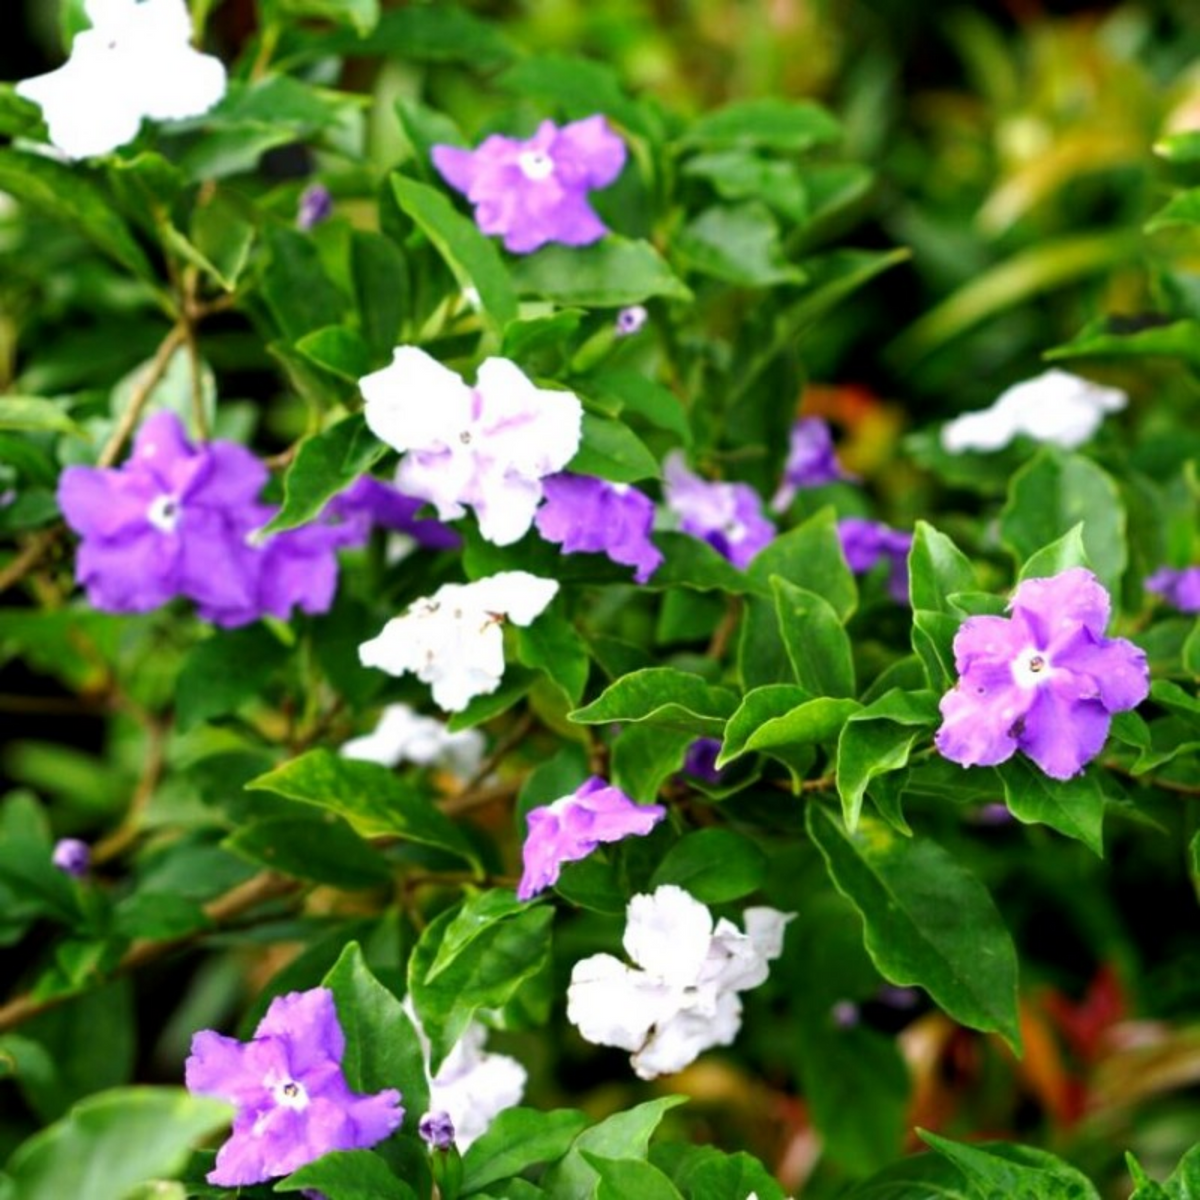 Yesterday Today and Tomorrow Plant / Sunday Monday (Brunfelsia pauciflora) Flowering/Ornamental Live Plant (Home & Garden)